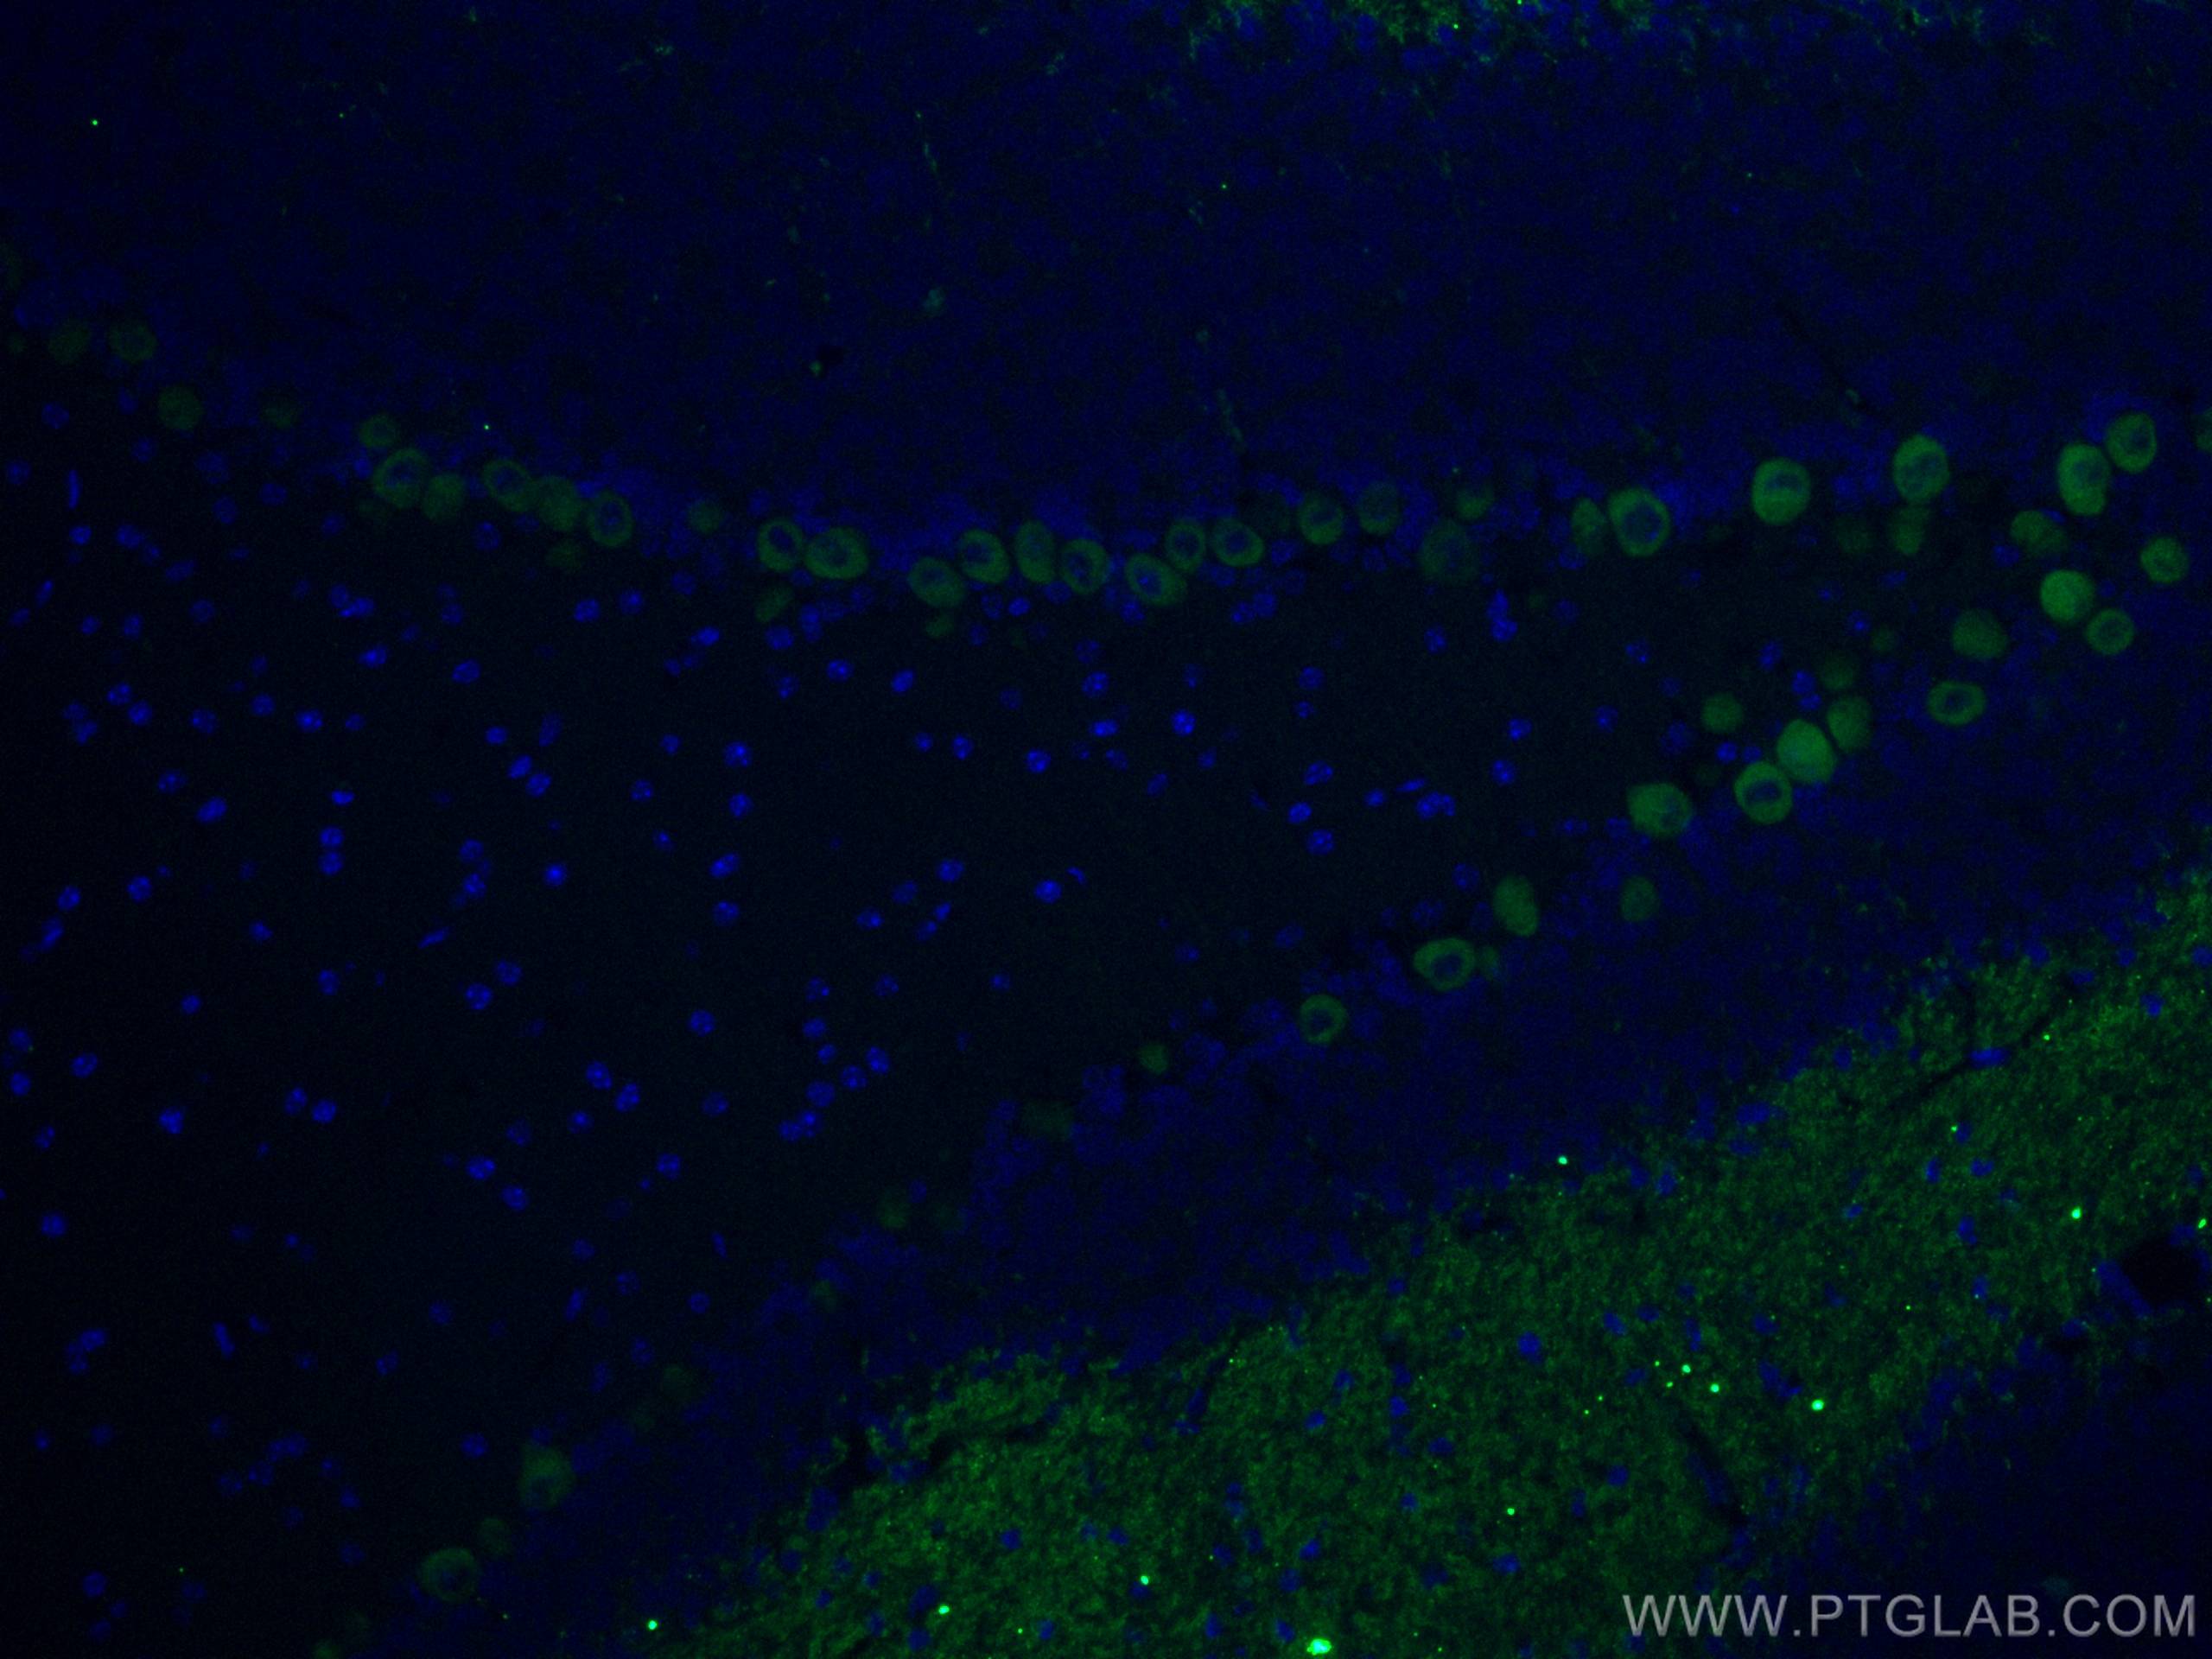 IF Staining of mouse cerebellum using CL488-66394